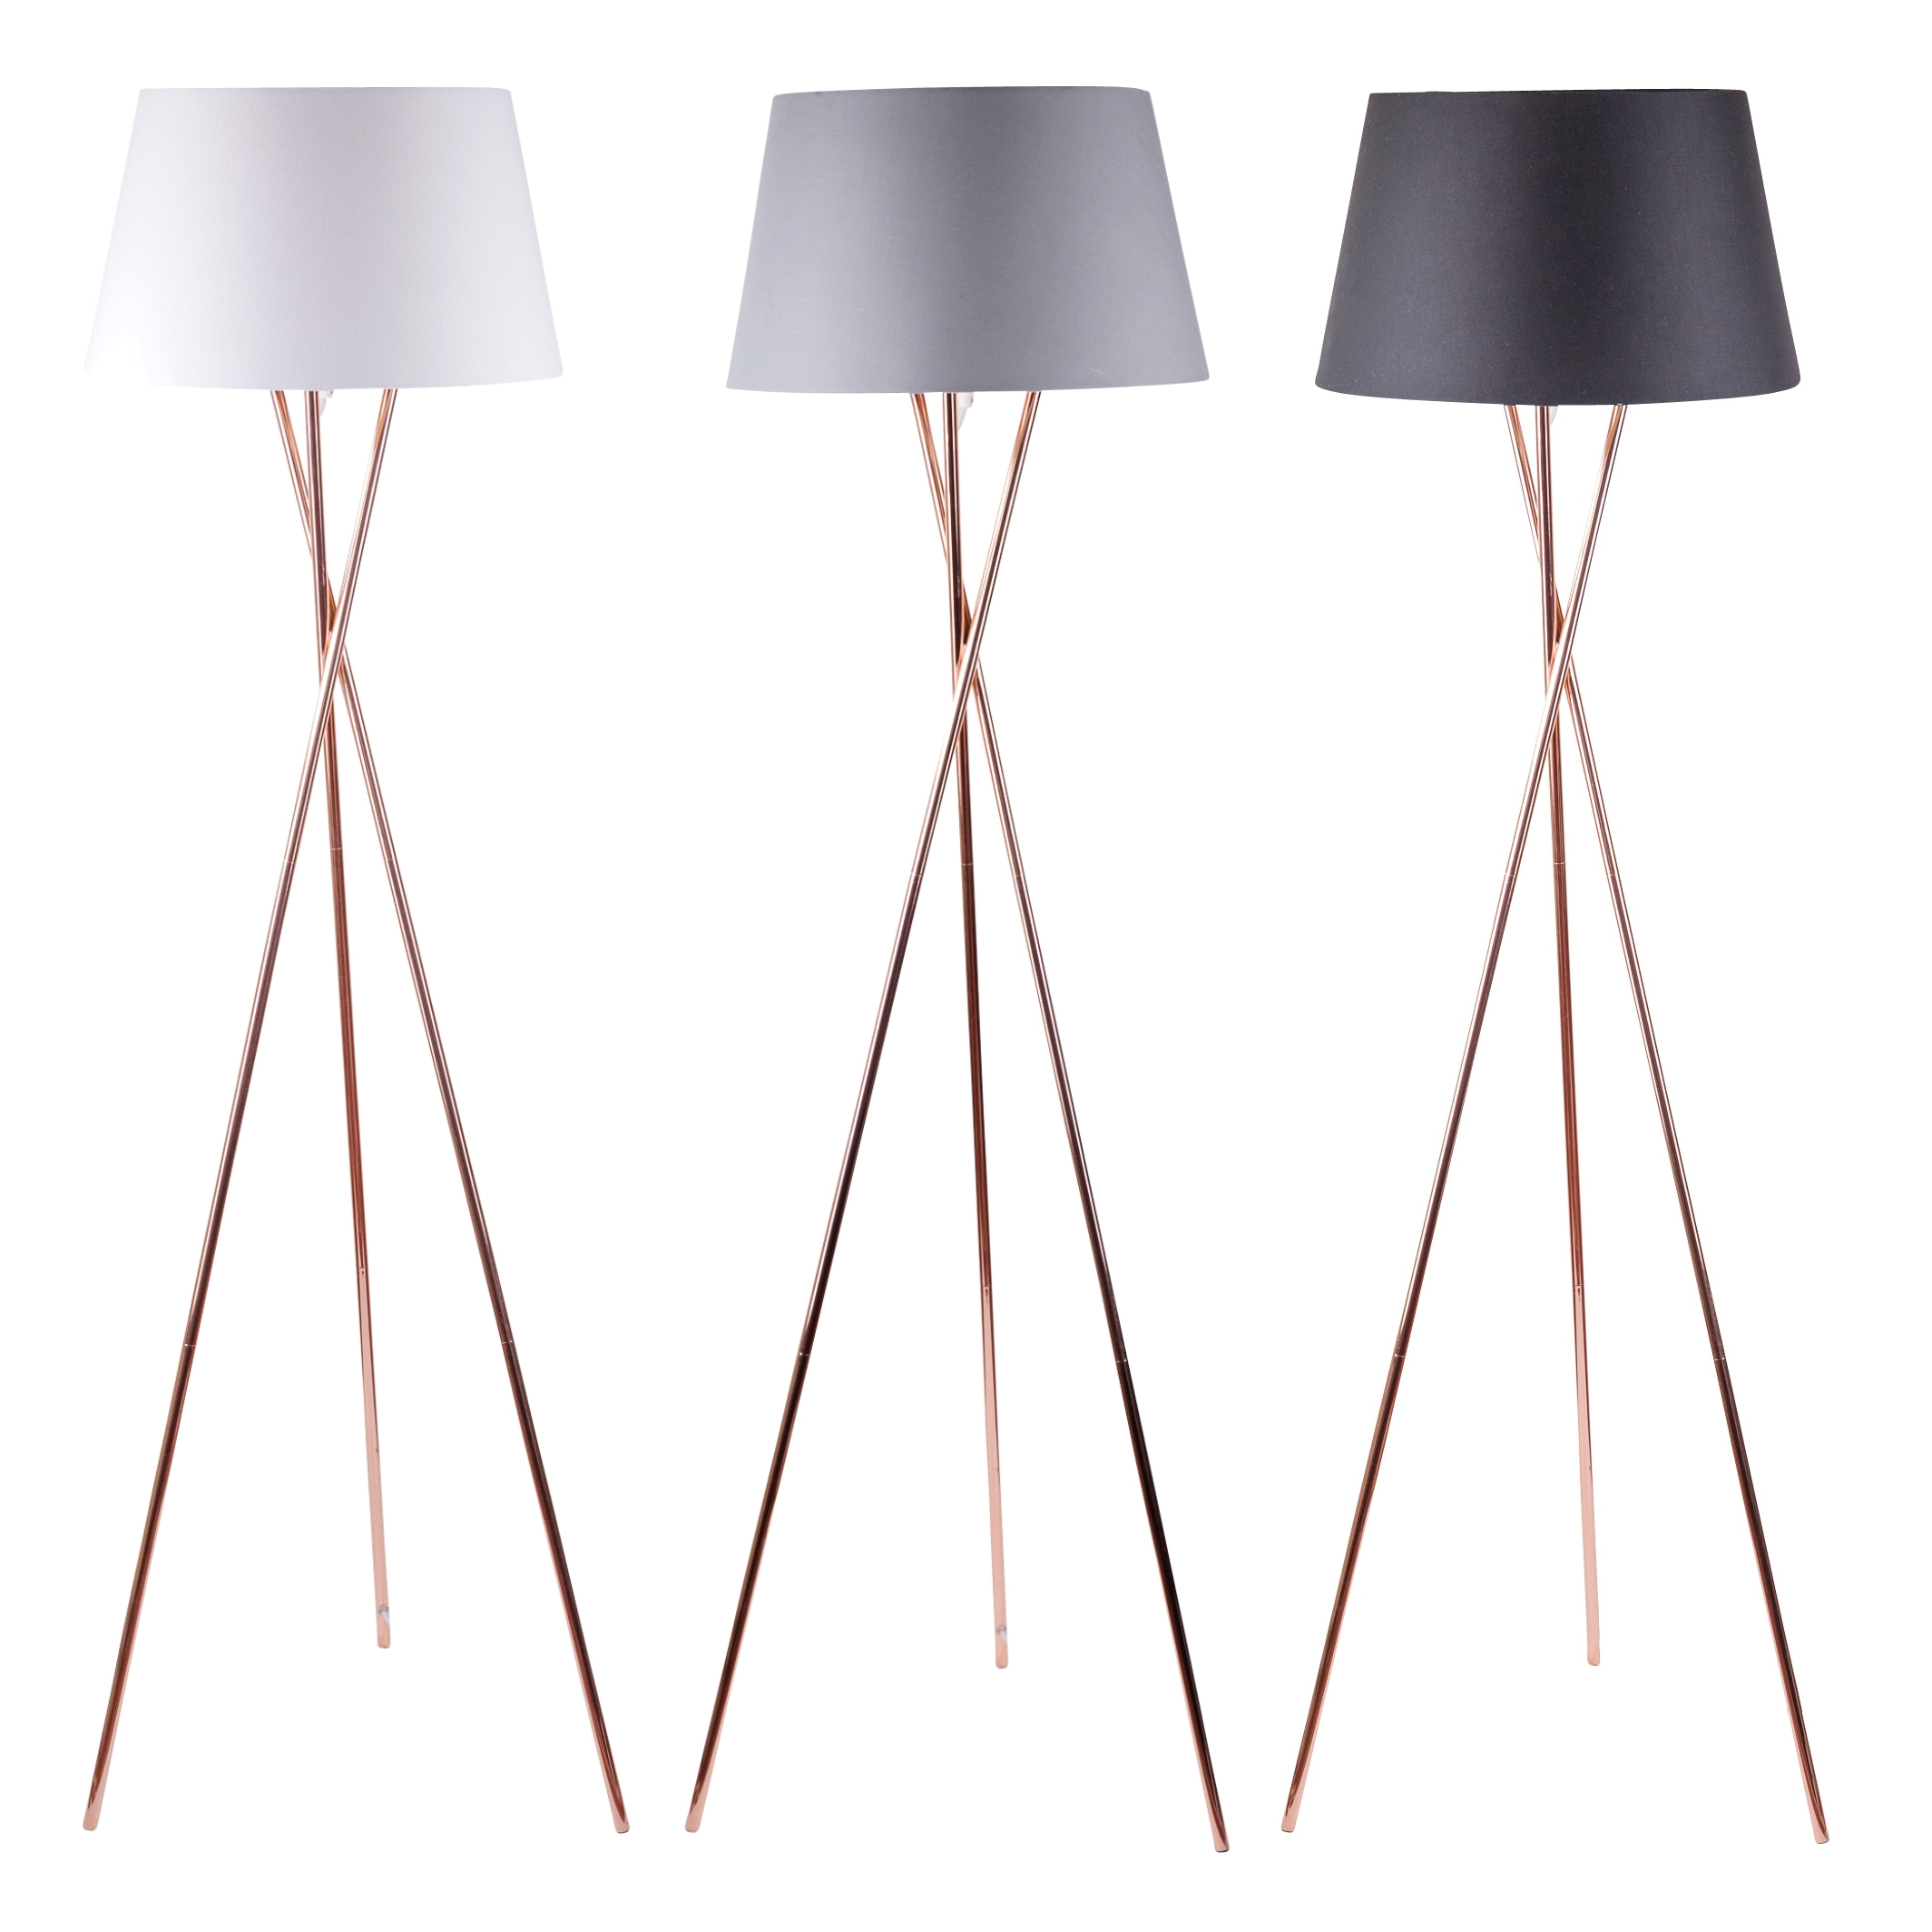 Details About Modern Copper Tripod Floor Lamp Standard Light With Grey White Or Black Shade in dimensions 2129 X 2129